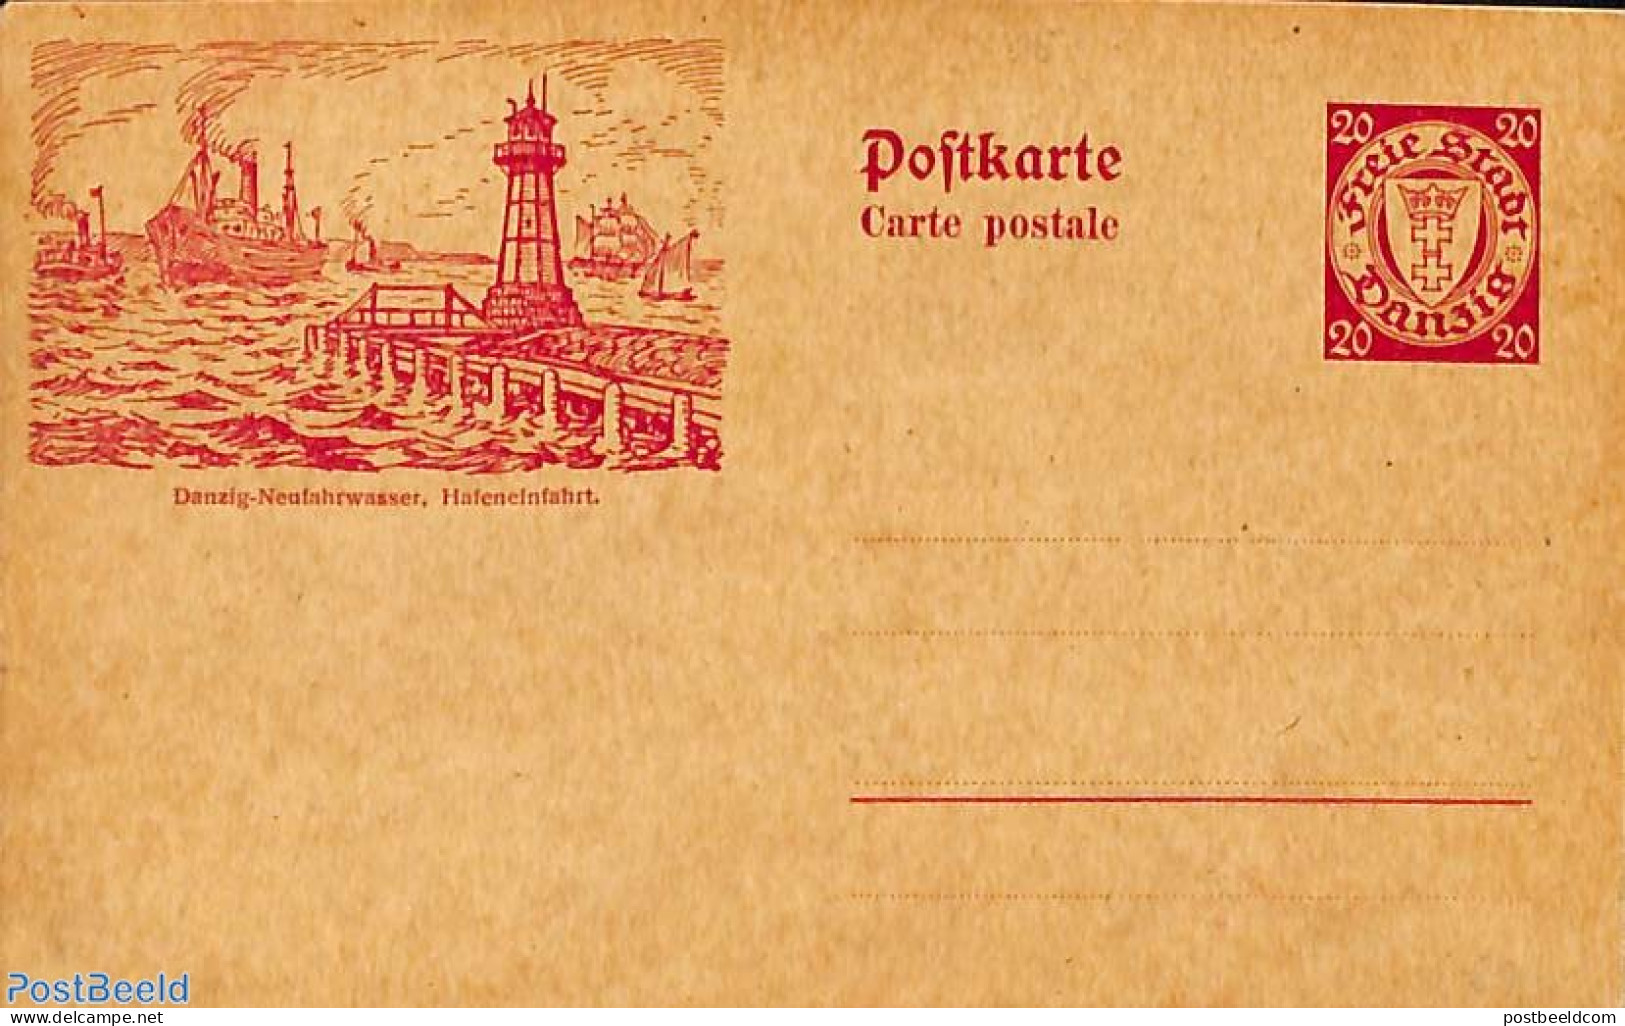 Germany, Danzig 1925 Illustrated Postcard 20pf, Unused Postal Stationary, Transport - Various - Ships And Boats - Ligh.. - Boten